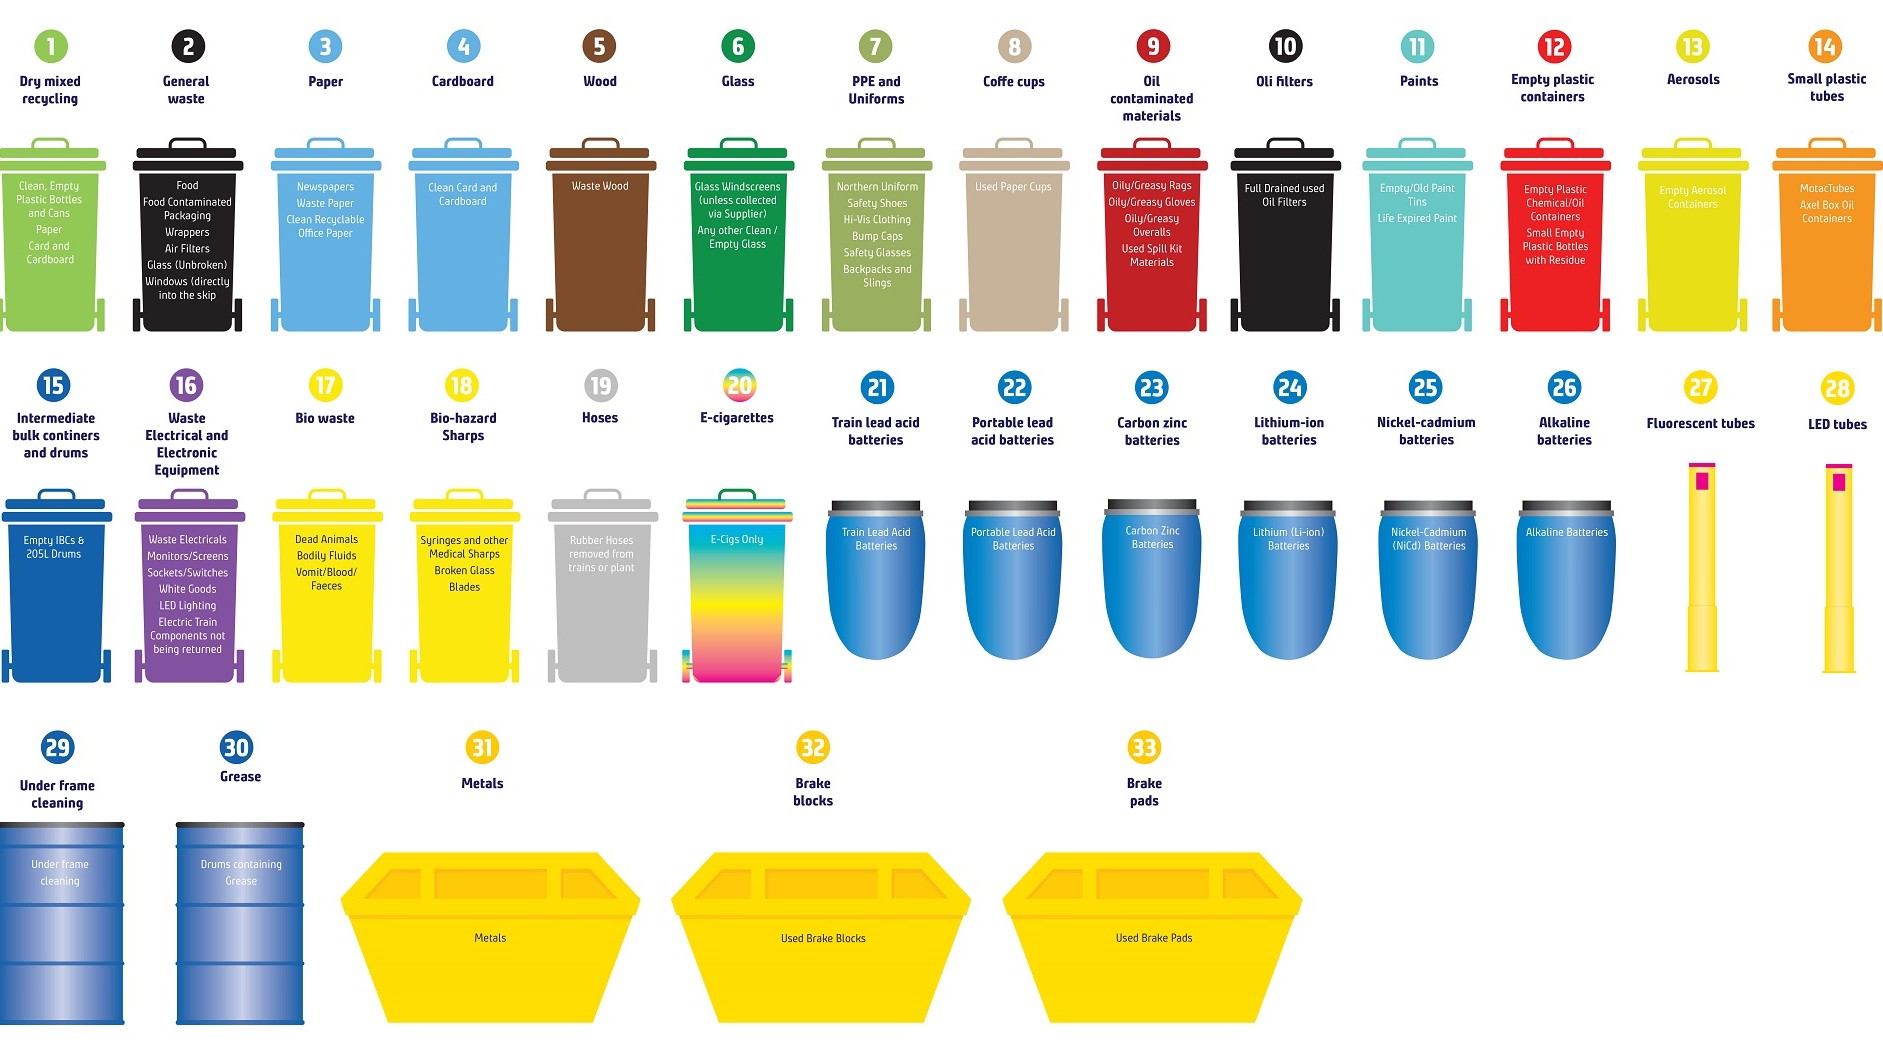 Image shows 33 recycling categories in-use at Northern-4